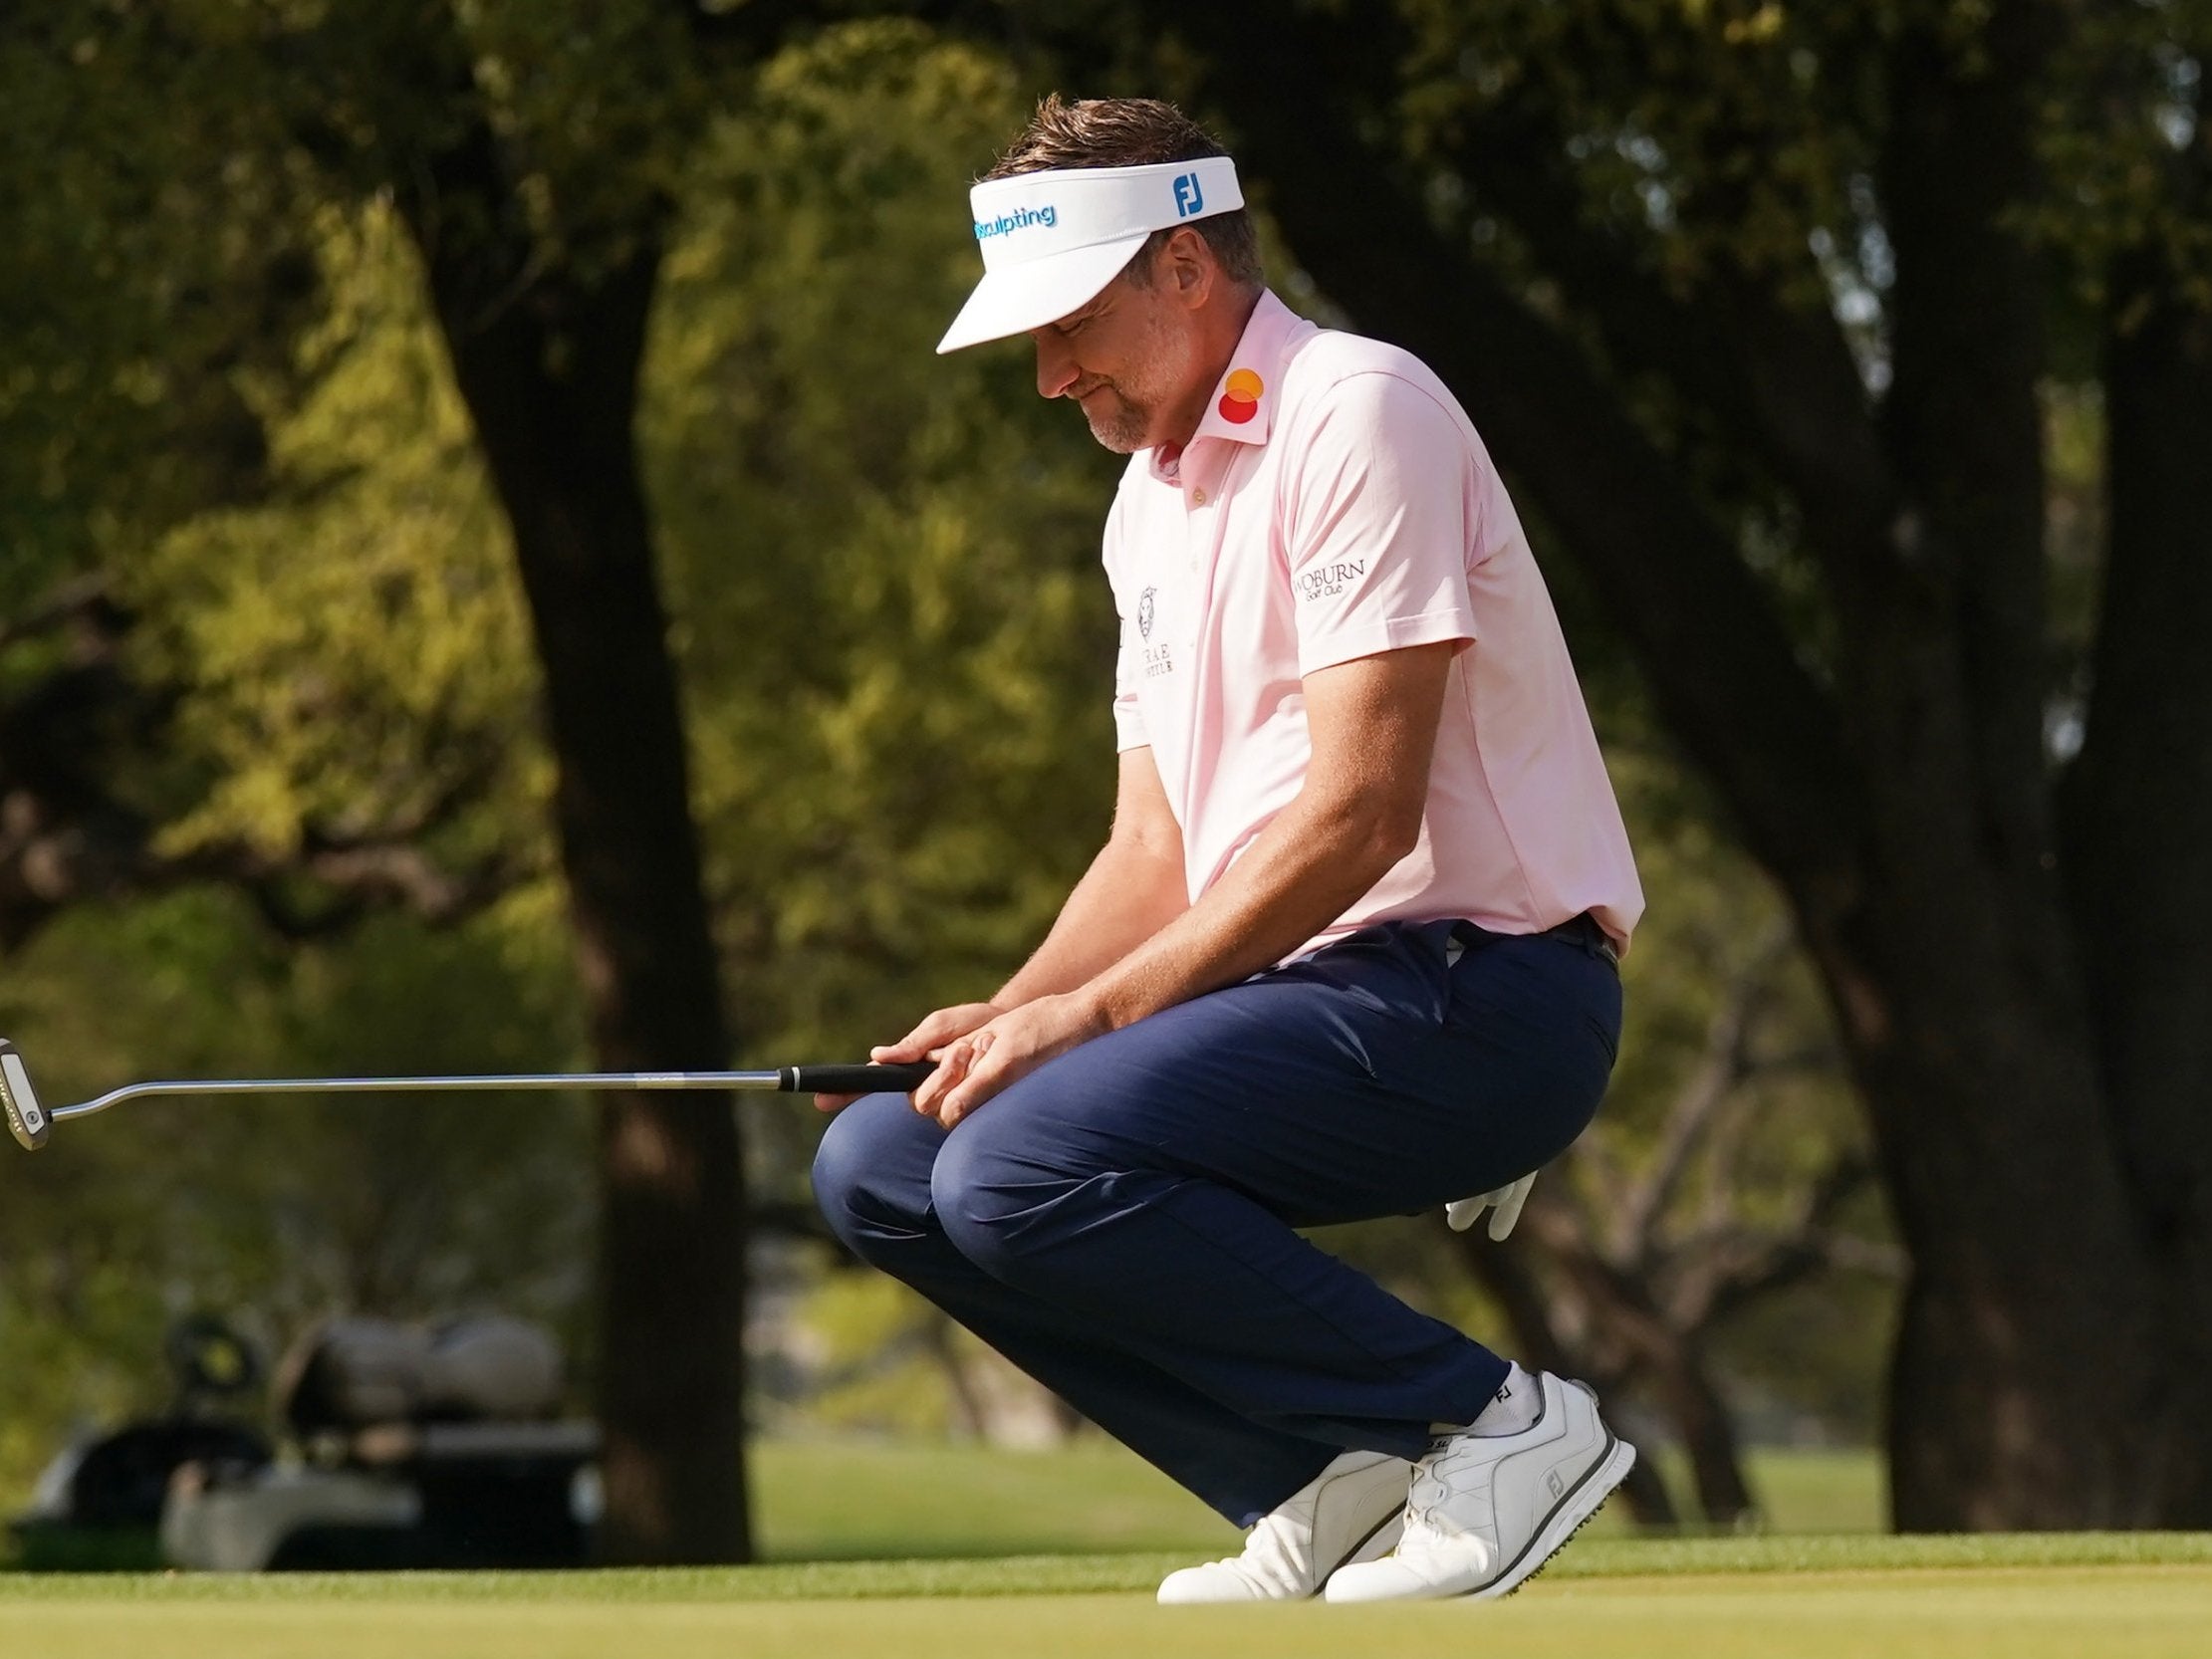 Ian Poulter was knocked out in a play-off against Kevin Kisner